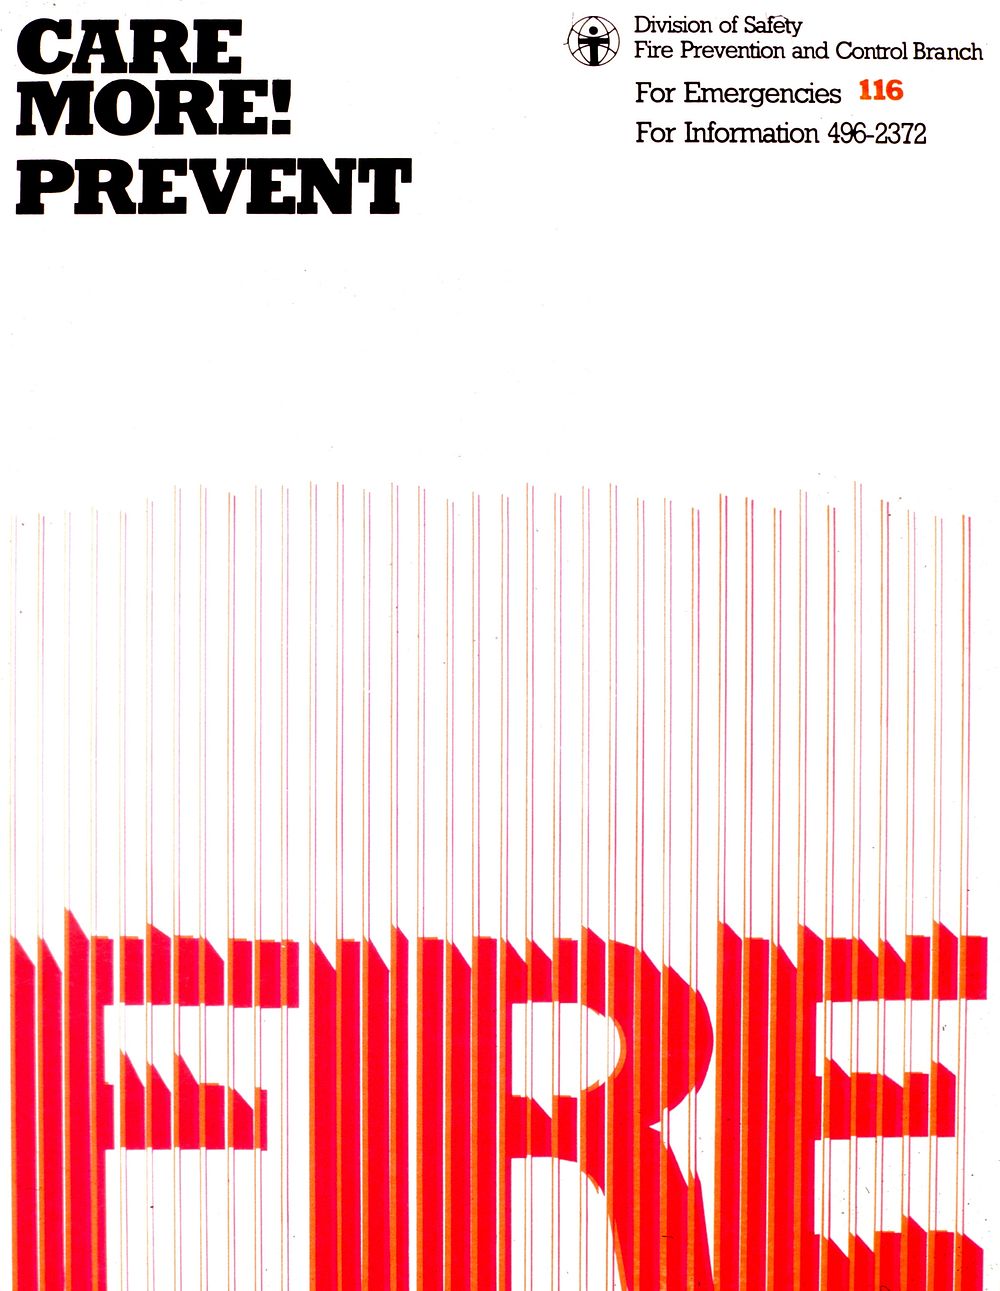 Care More!: Prevent Fire. Original public domain image from Flickr